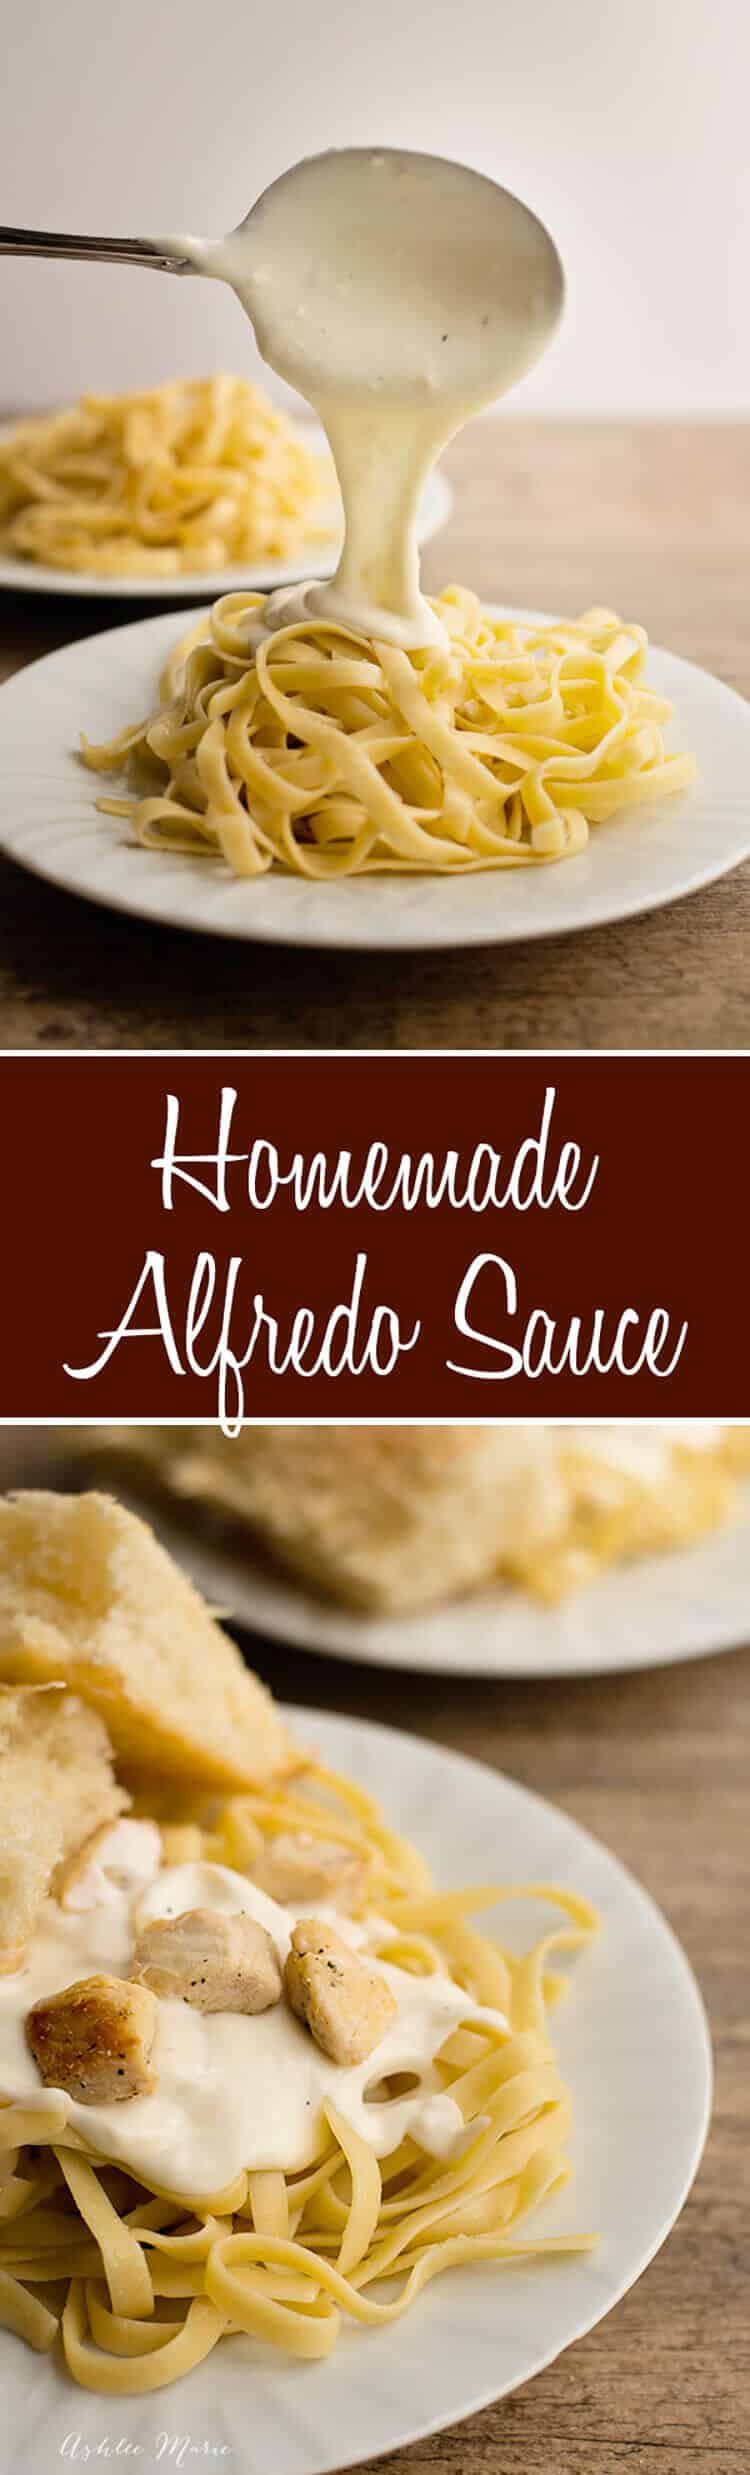 it doesnt get much better than creamy, cheesy homemade alfredo sauce. this recipe is easy to make and is always a huge hit